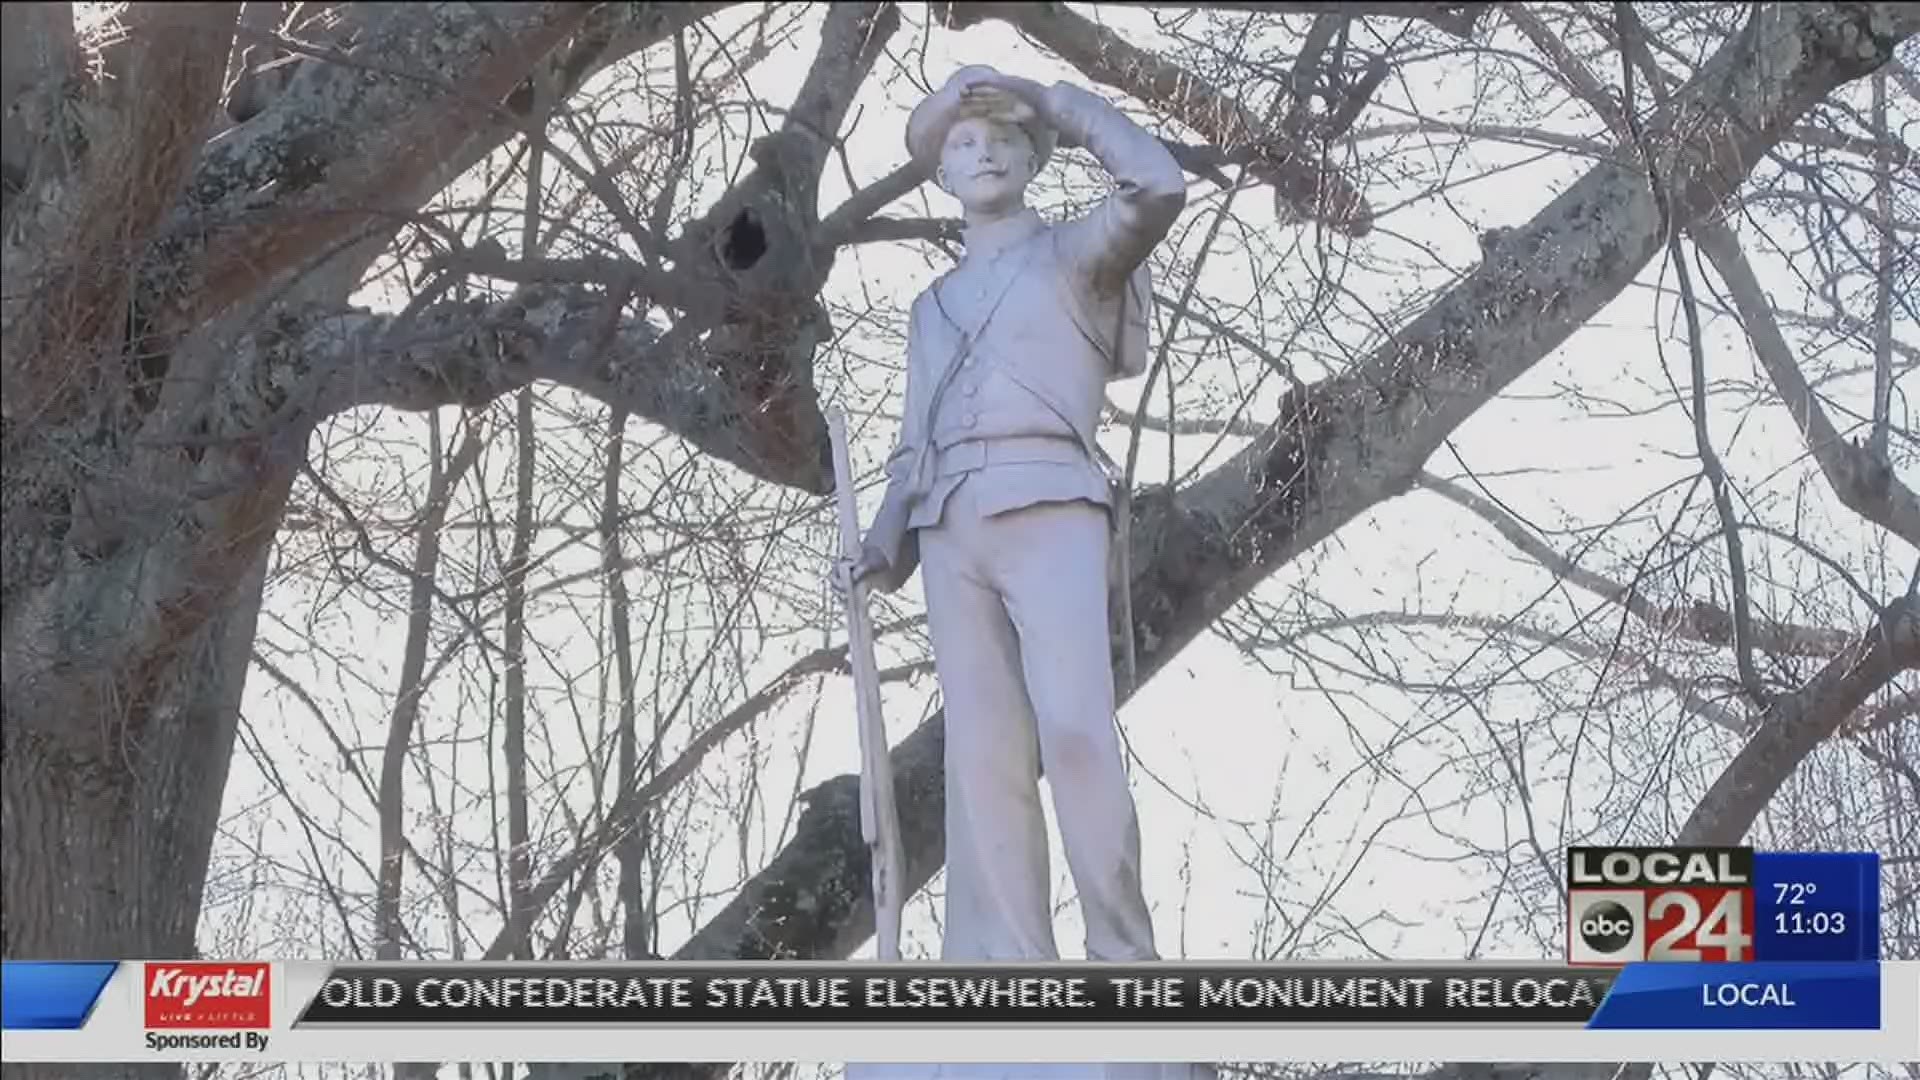 Move comes after months long push from Ole Miss groups to move the more than 100-year monument elsewhere.